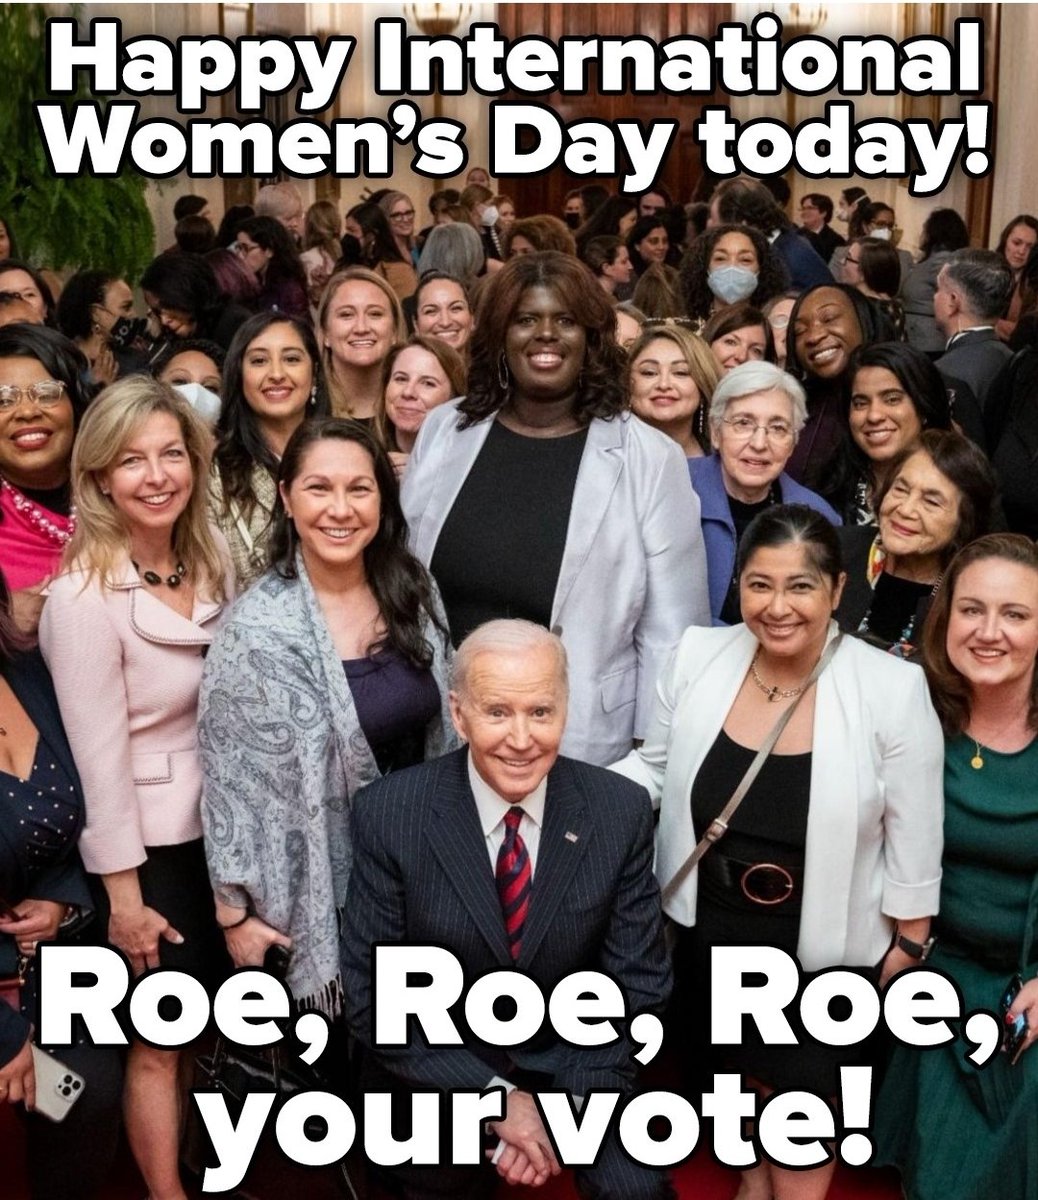 WE WILL REMEMBER THE GOP IN ROEVEMBER.

#HappyInternationalWomensDay